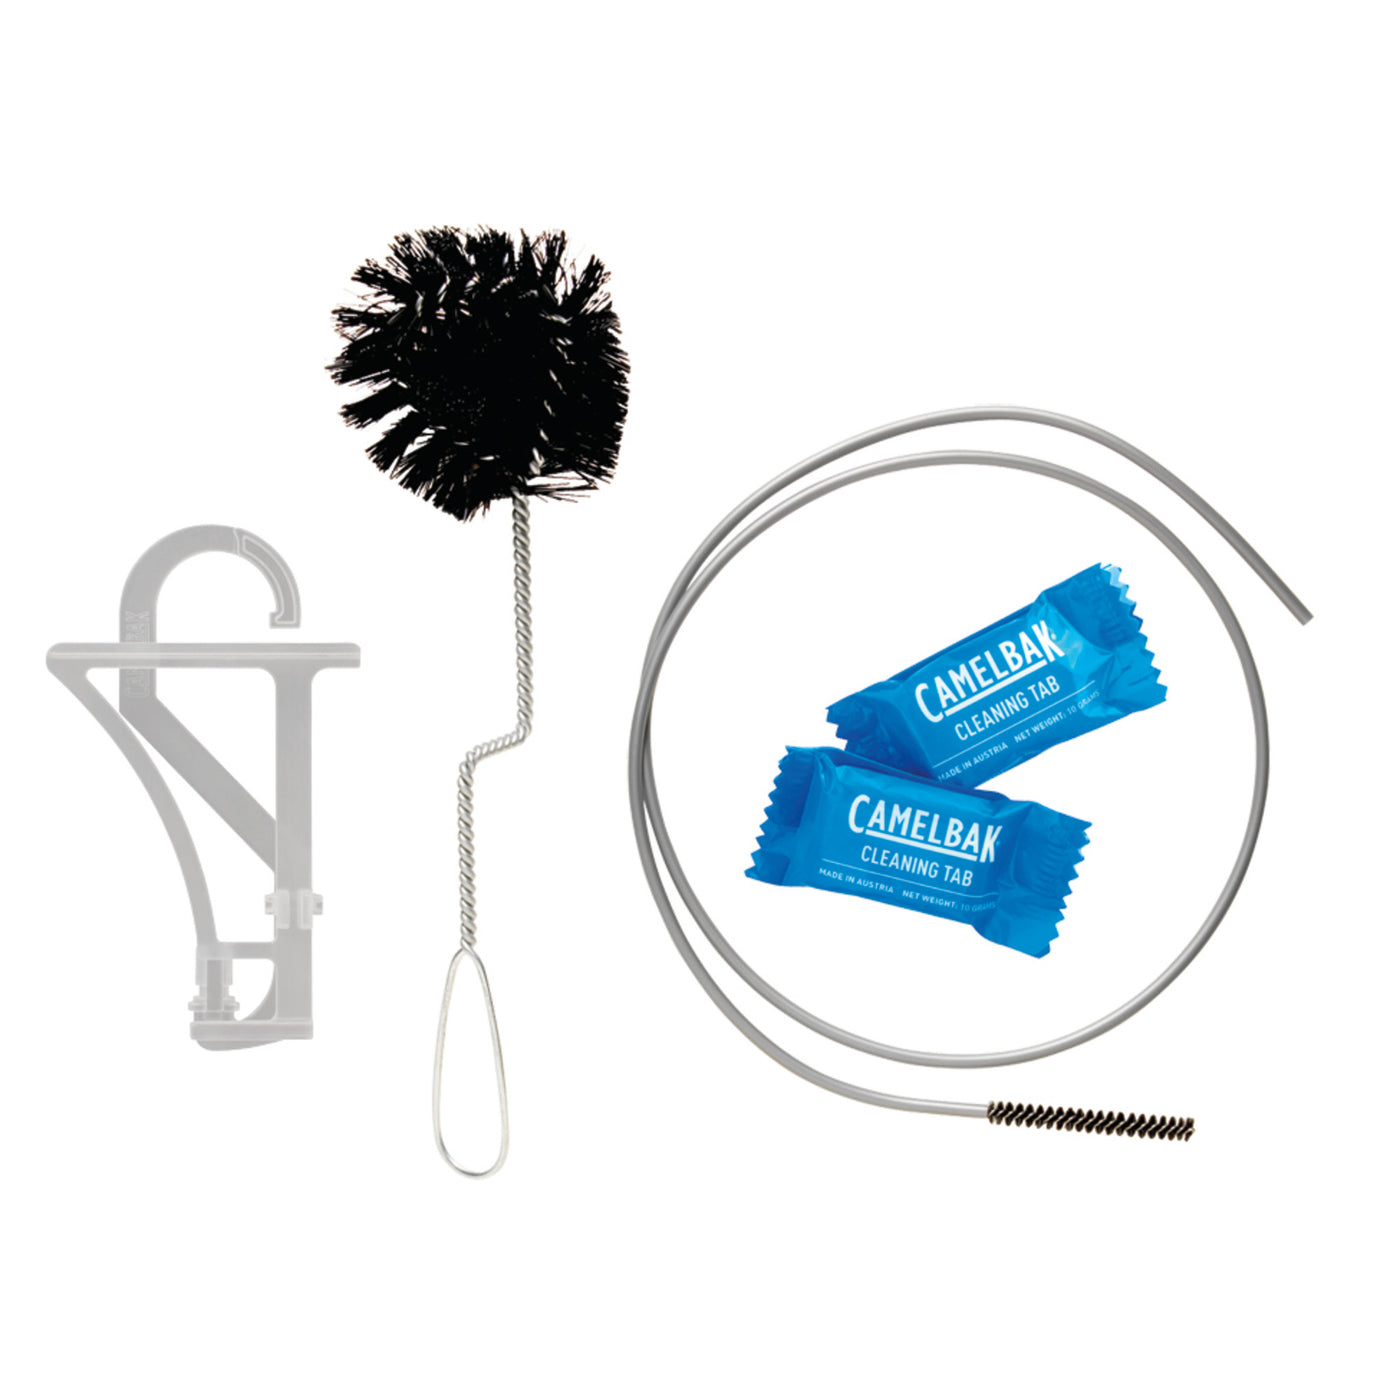 Crux Cleaning Kit